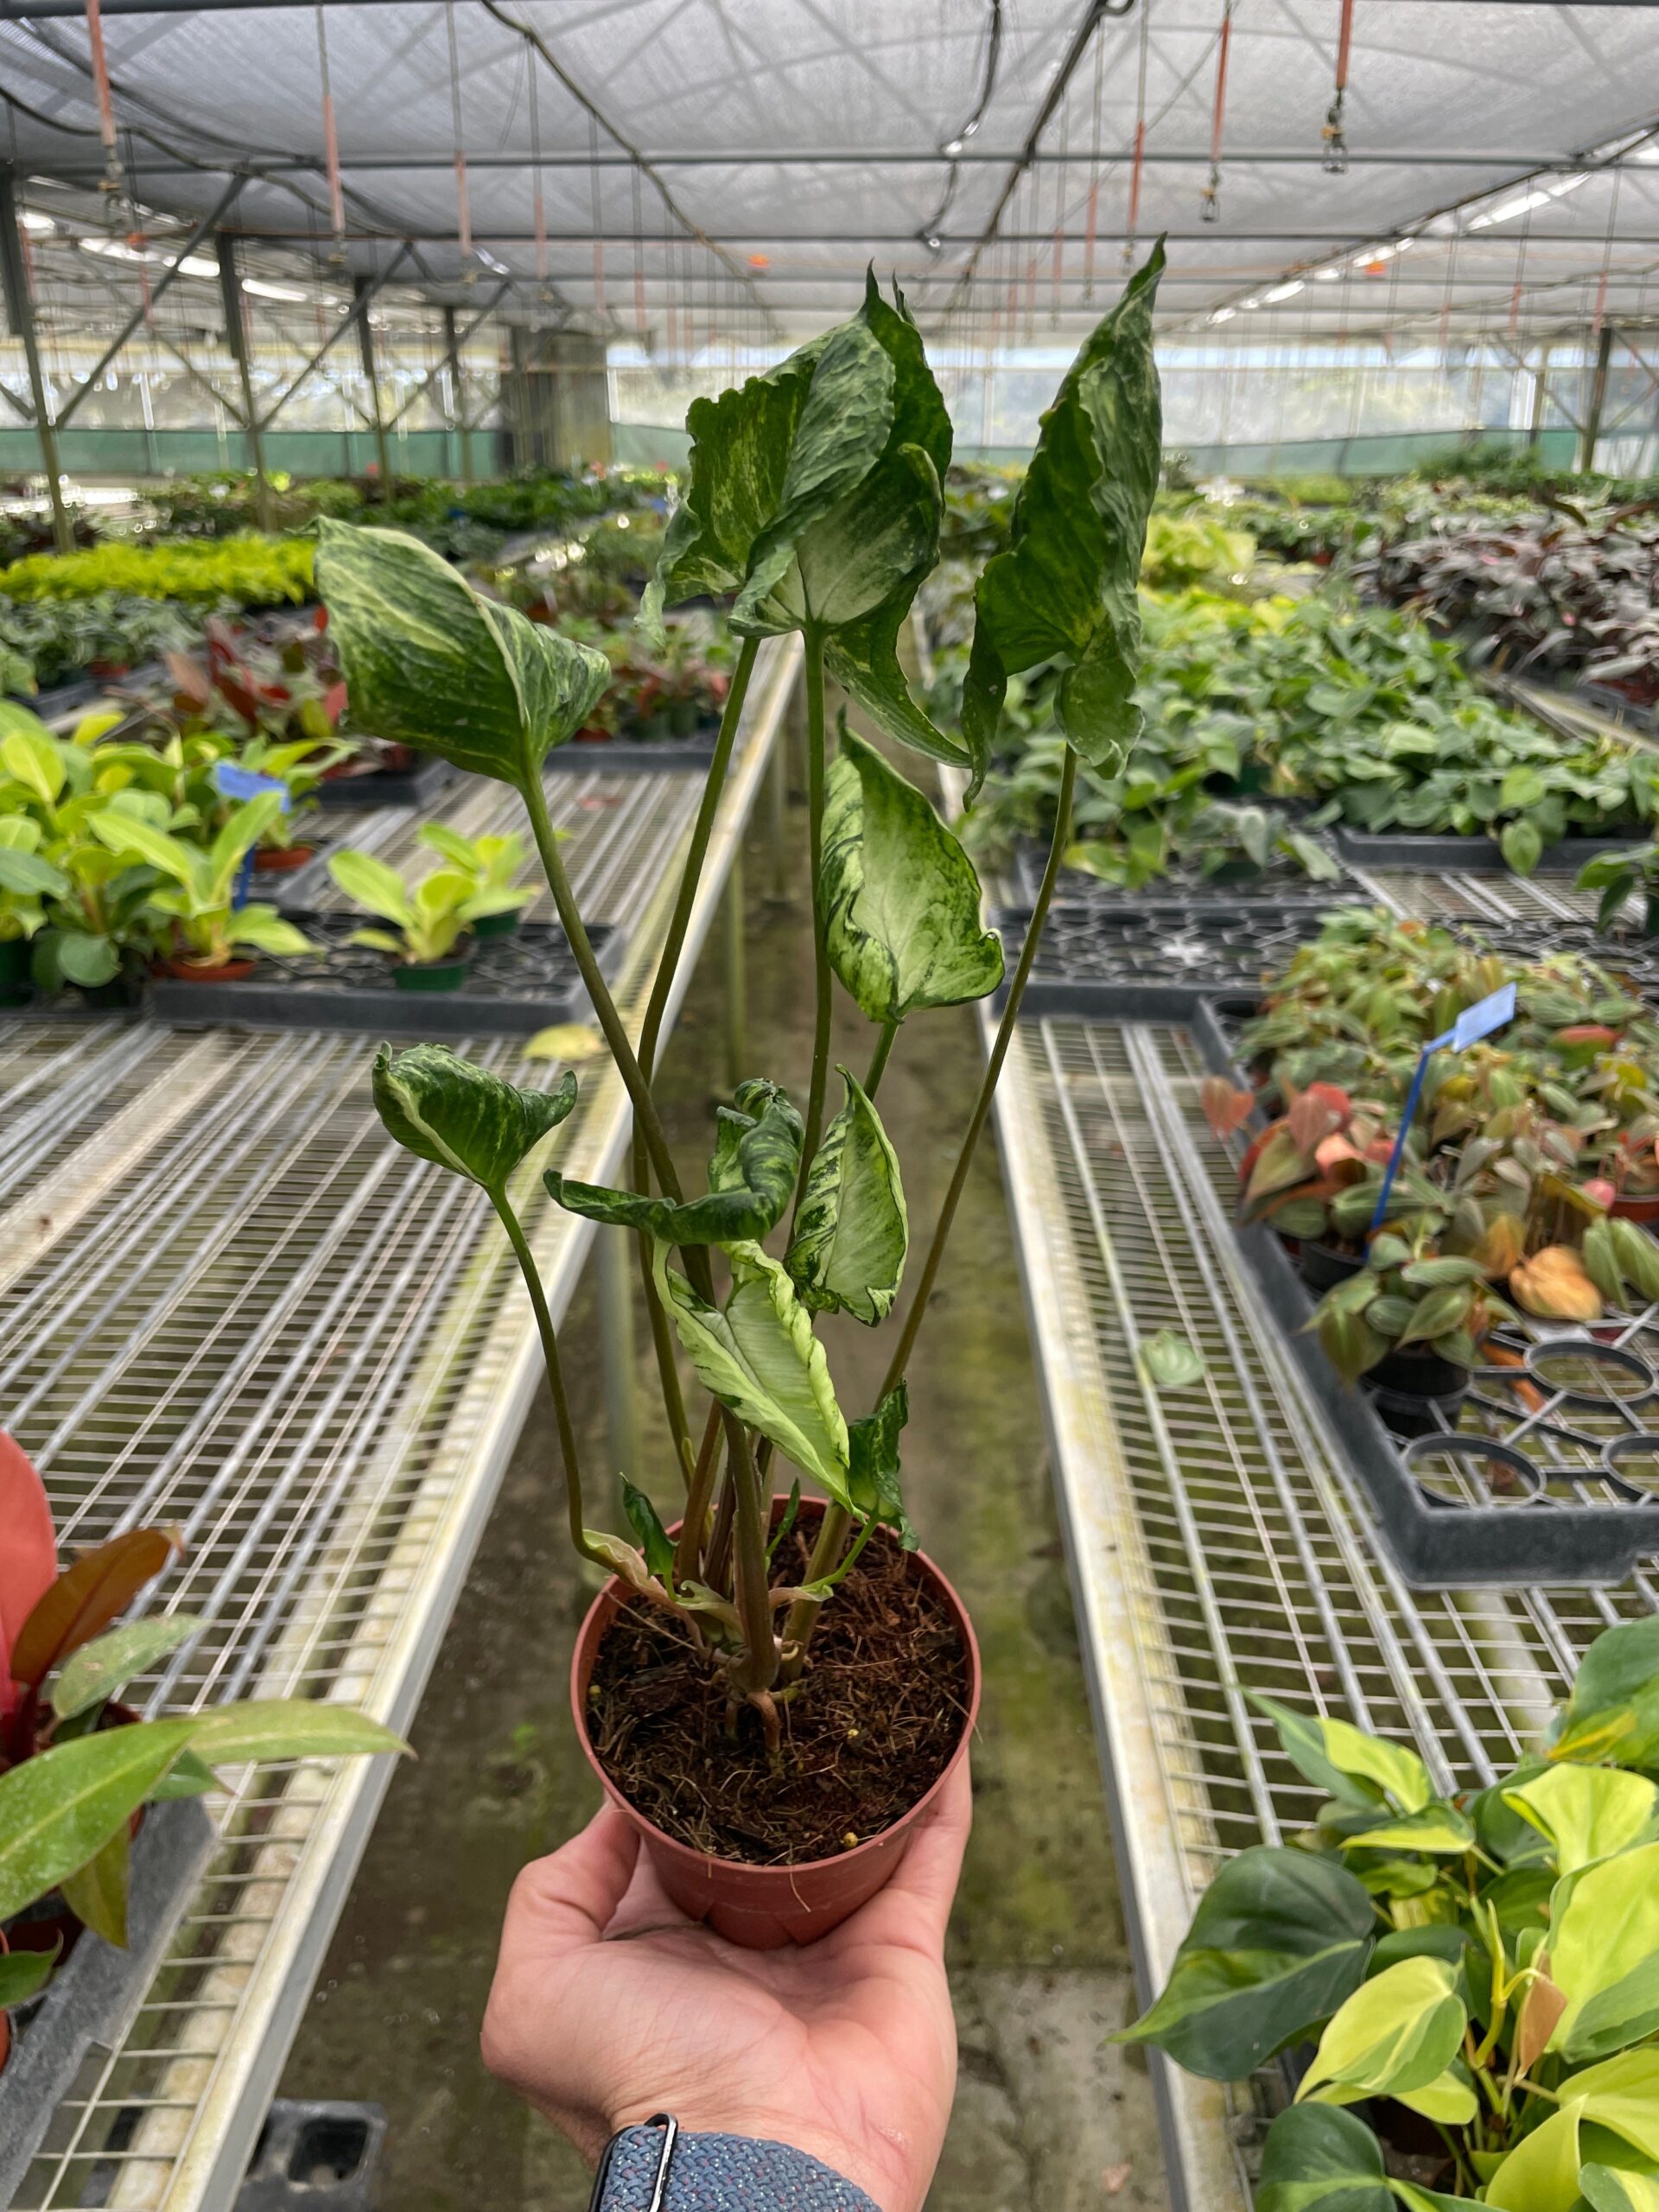 A person holding a potted plant in a greenhouse.